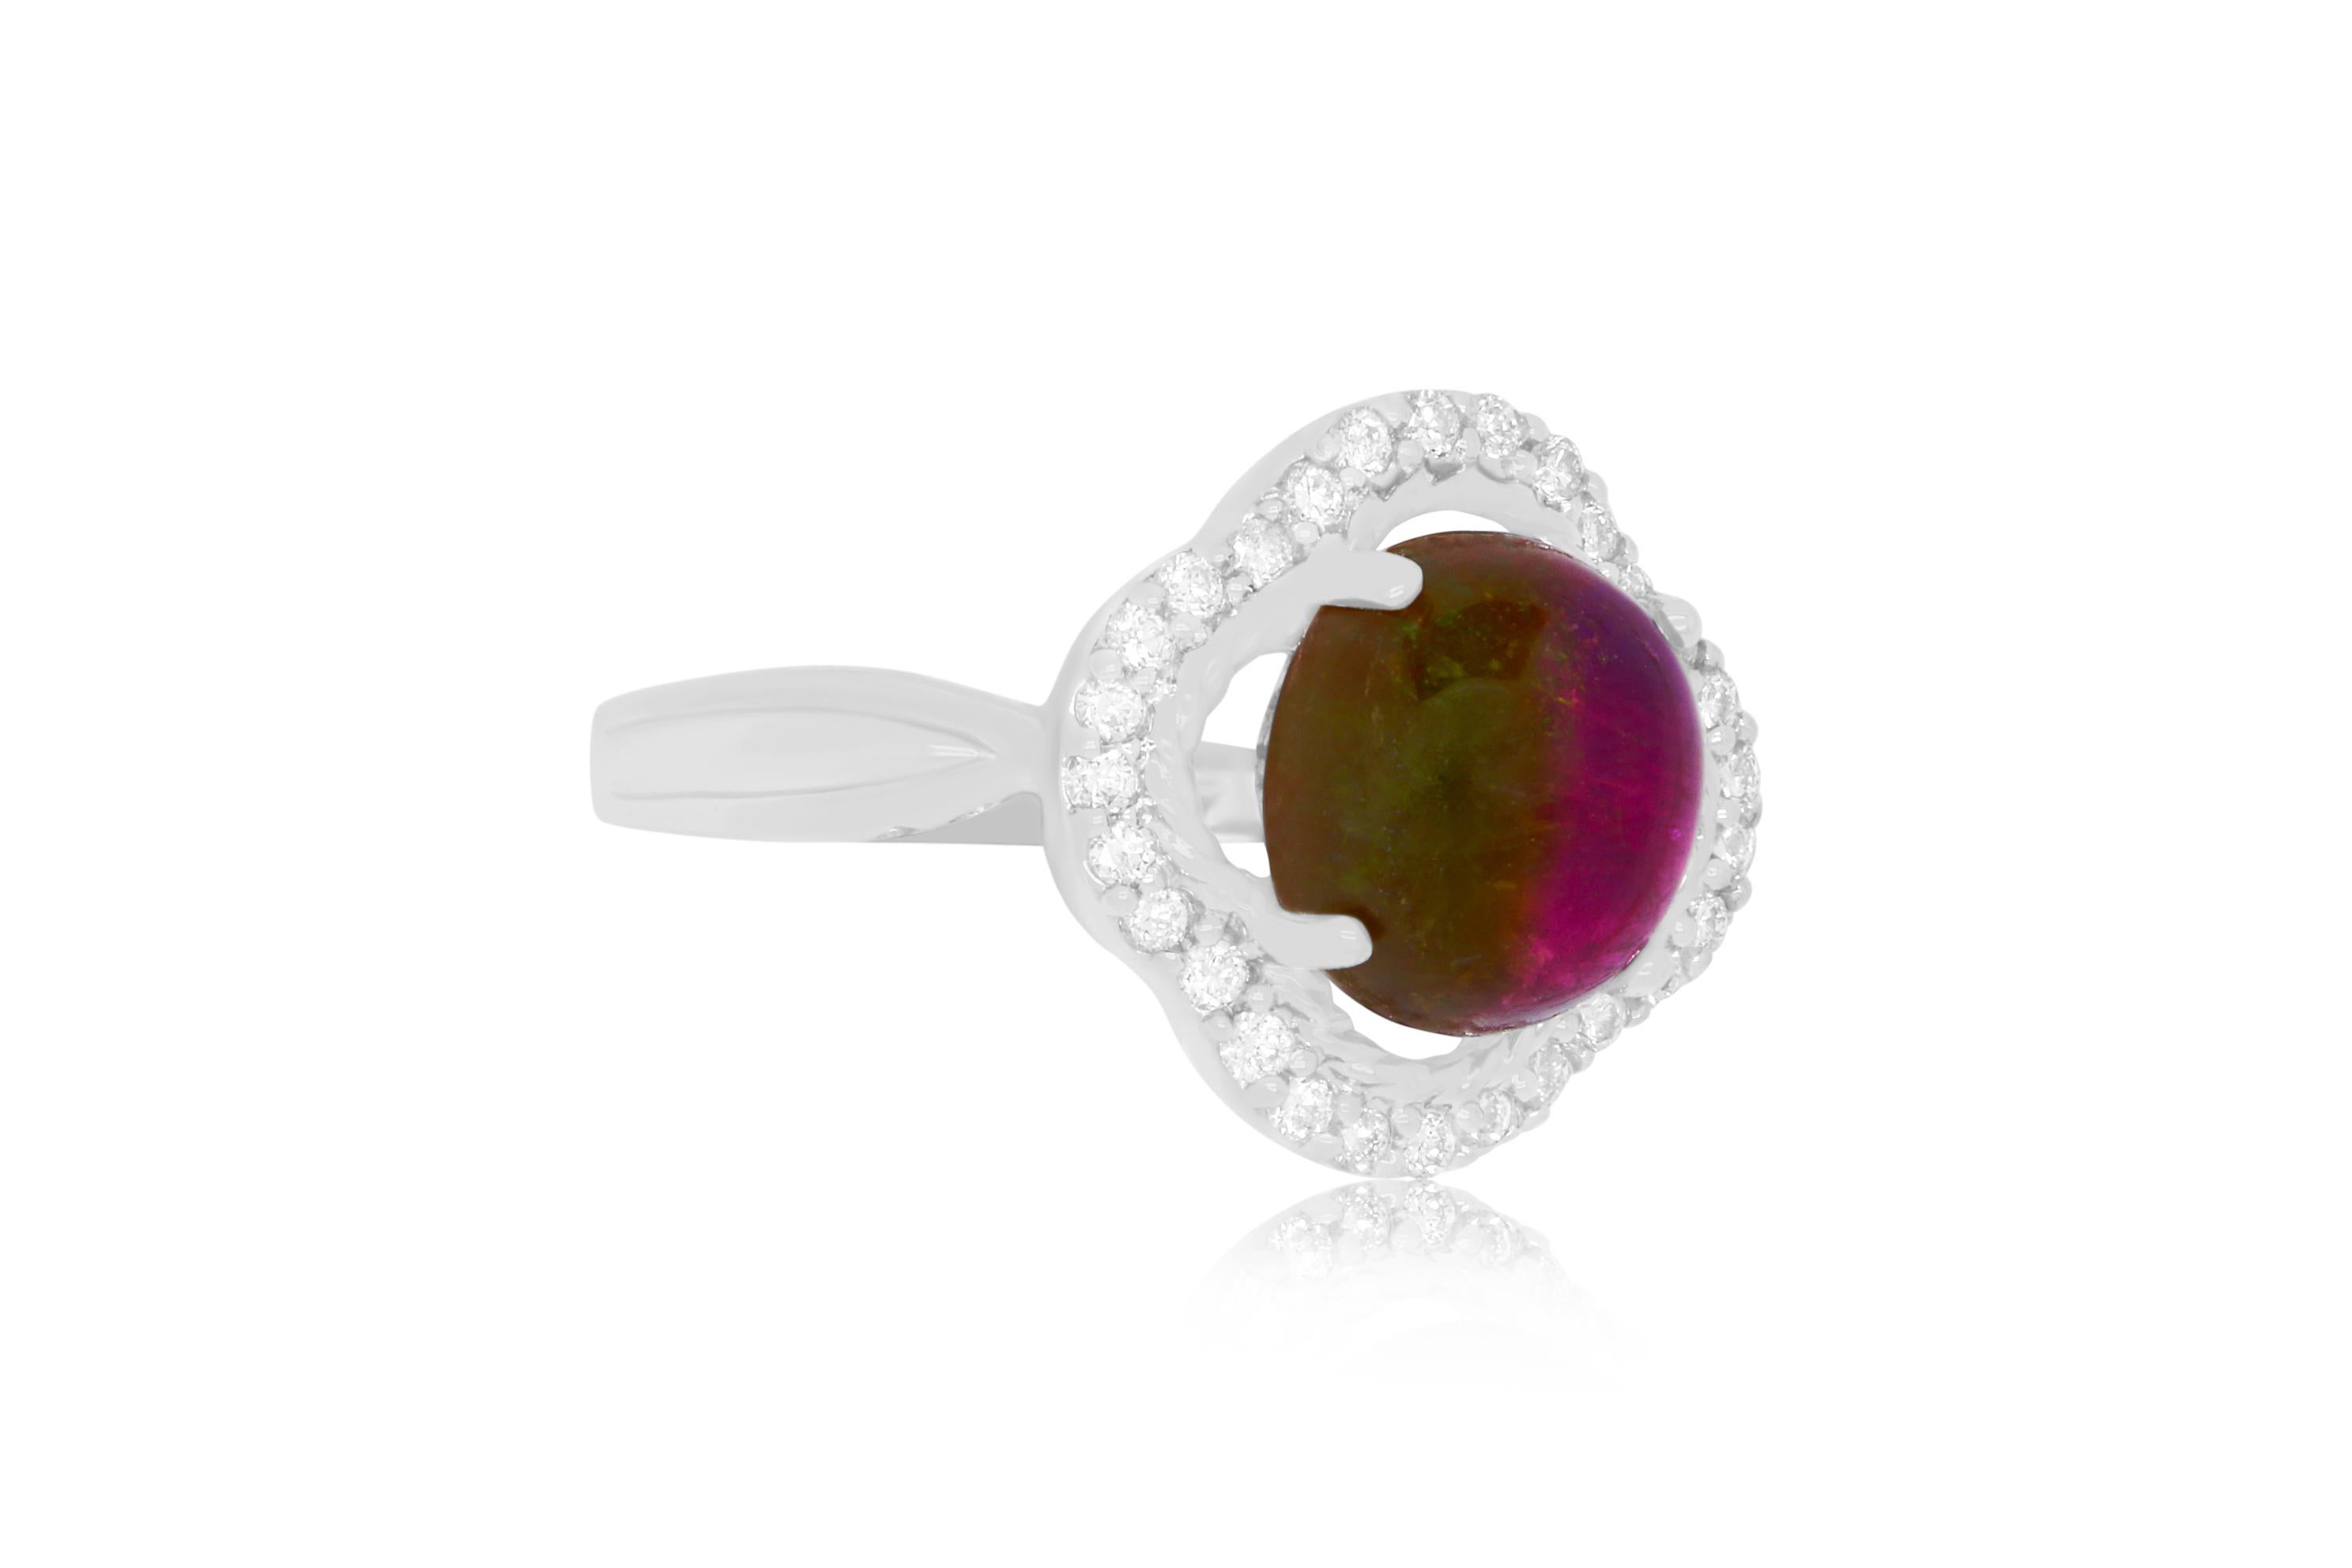 Take a bite out of summer with this unique Oval Shaped Bicolored Tourmaline Ring. Encased in 0.25 carats of brilliant white diamonds, this is a must have!

Material: 14K White Gold
Center Stone Details: 3.11 Carat Oval Shaped Bicolored Tourmaline -